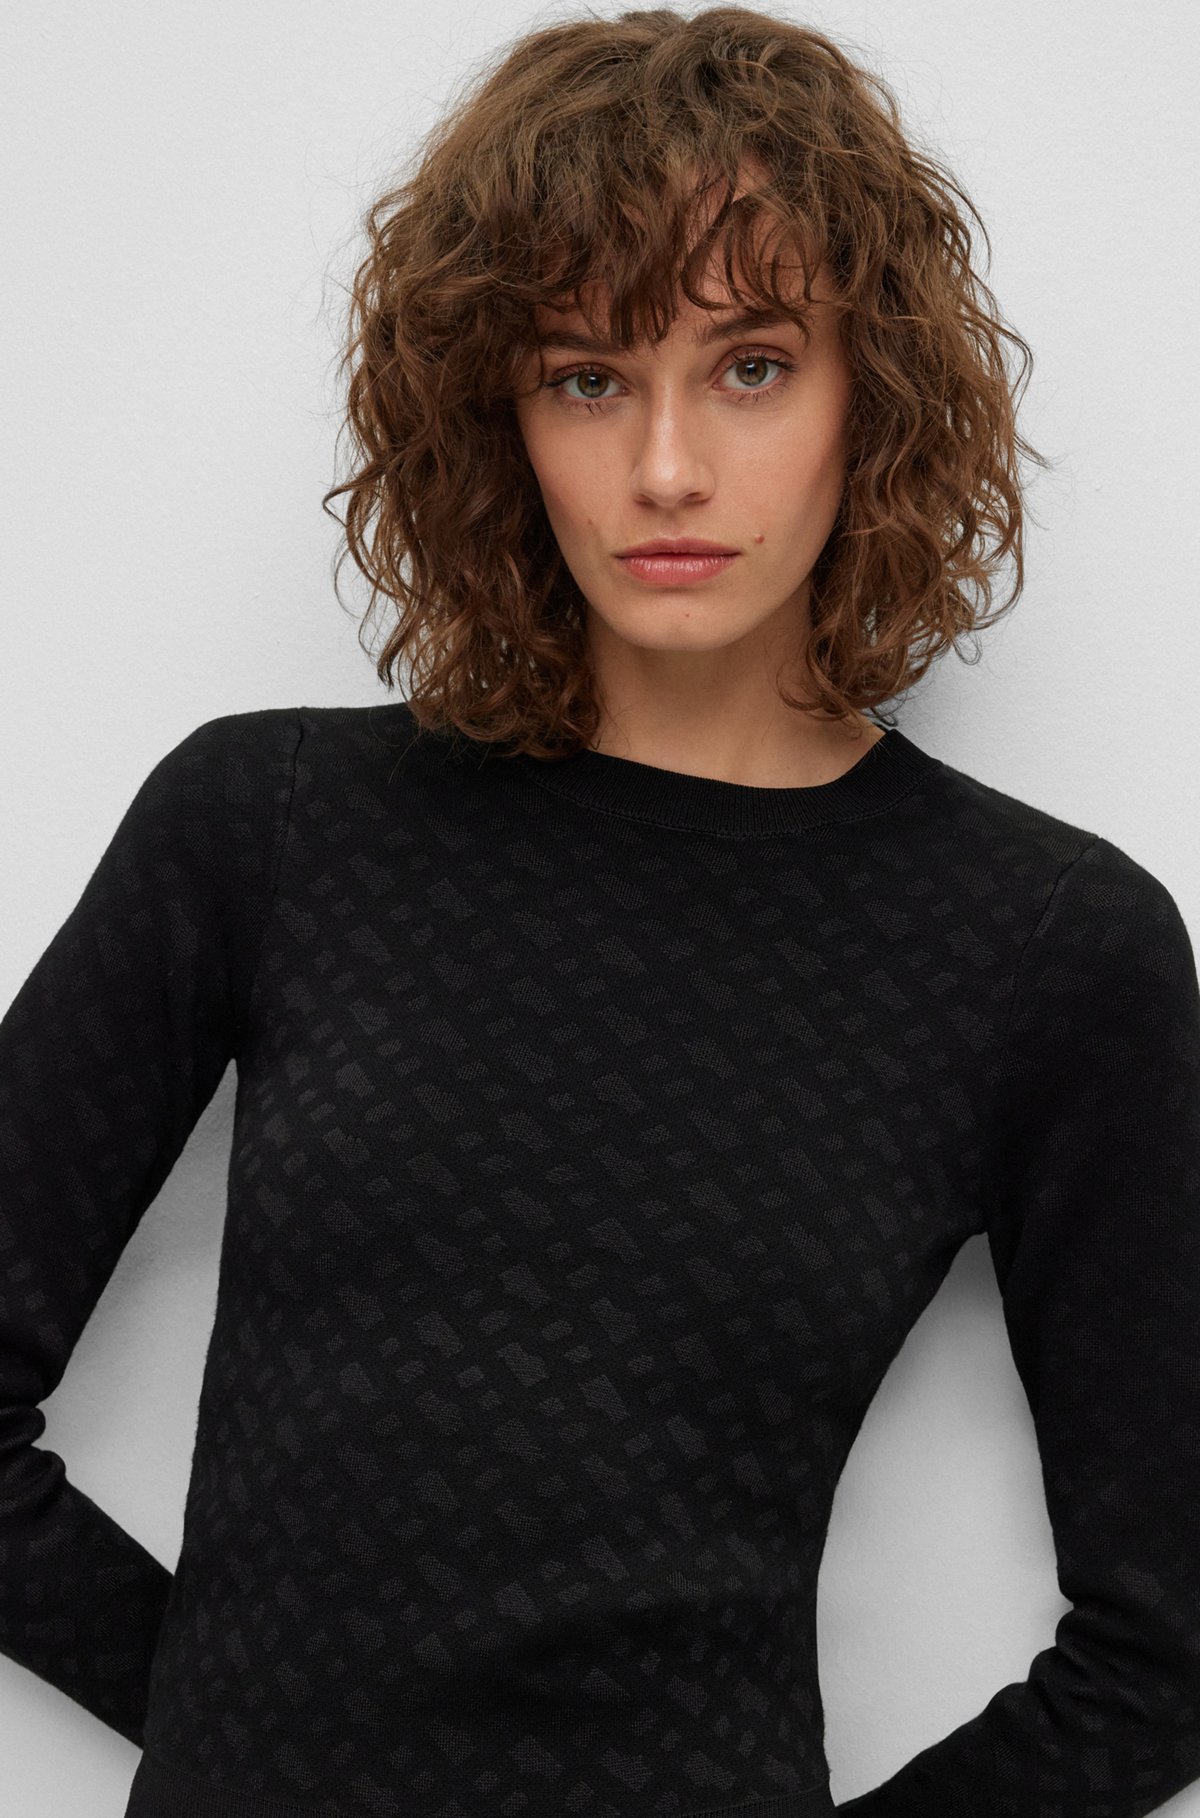 Knitted jacquard-pattern sweater with logo trim, Black